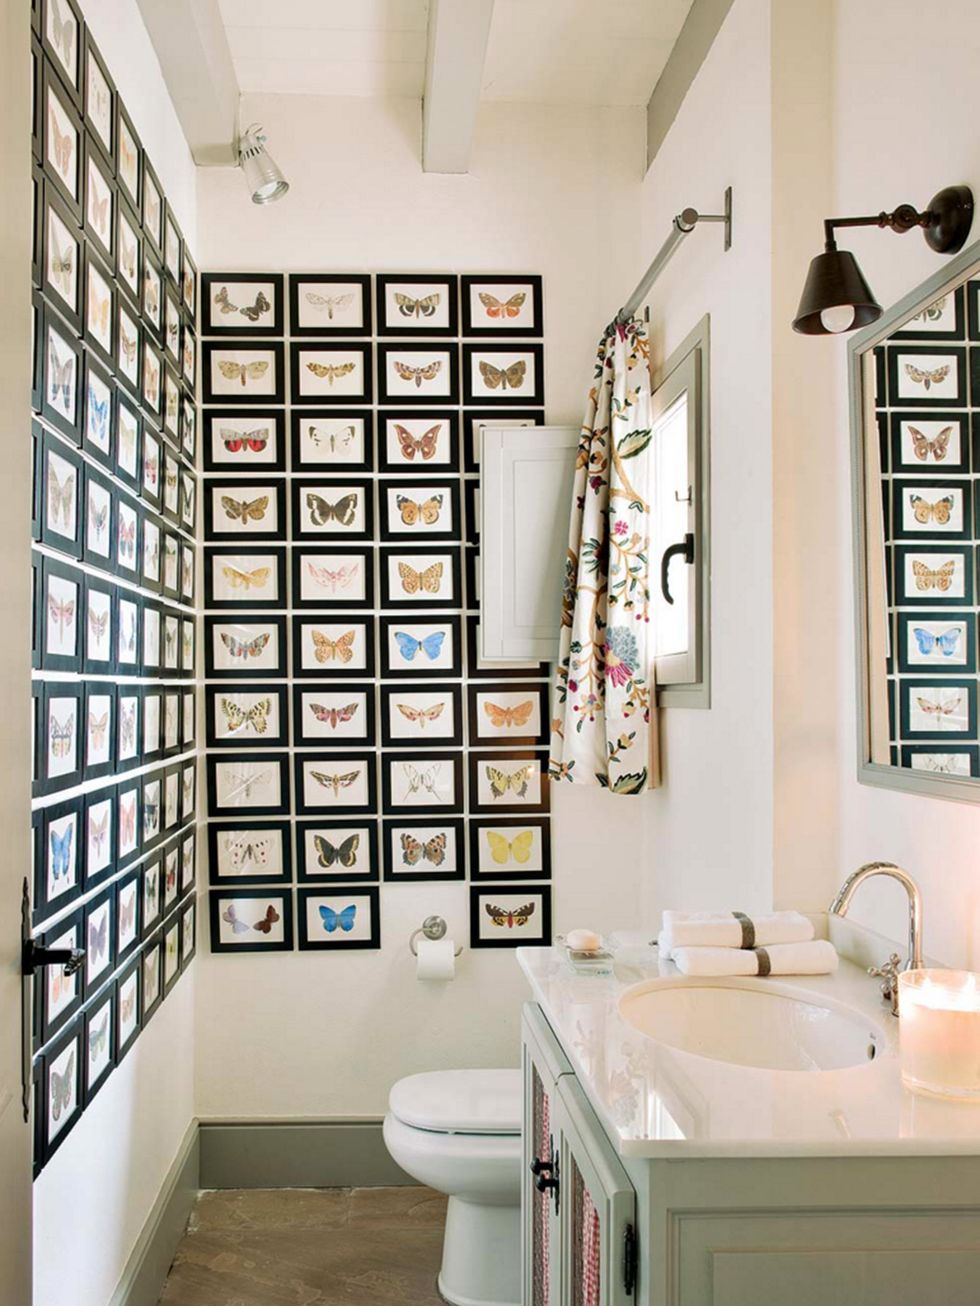 13 Amazing Ideas to Decorate the Walls of Your House